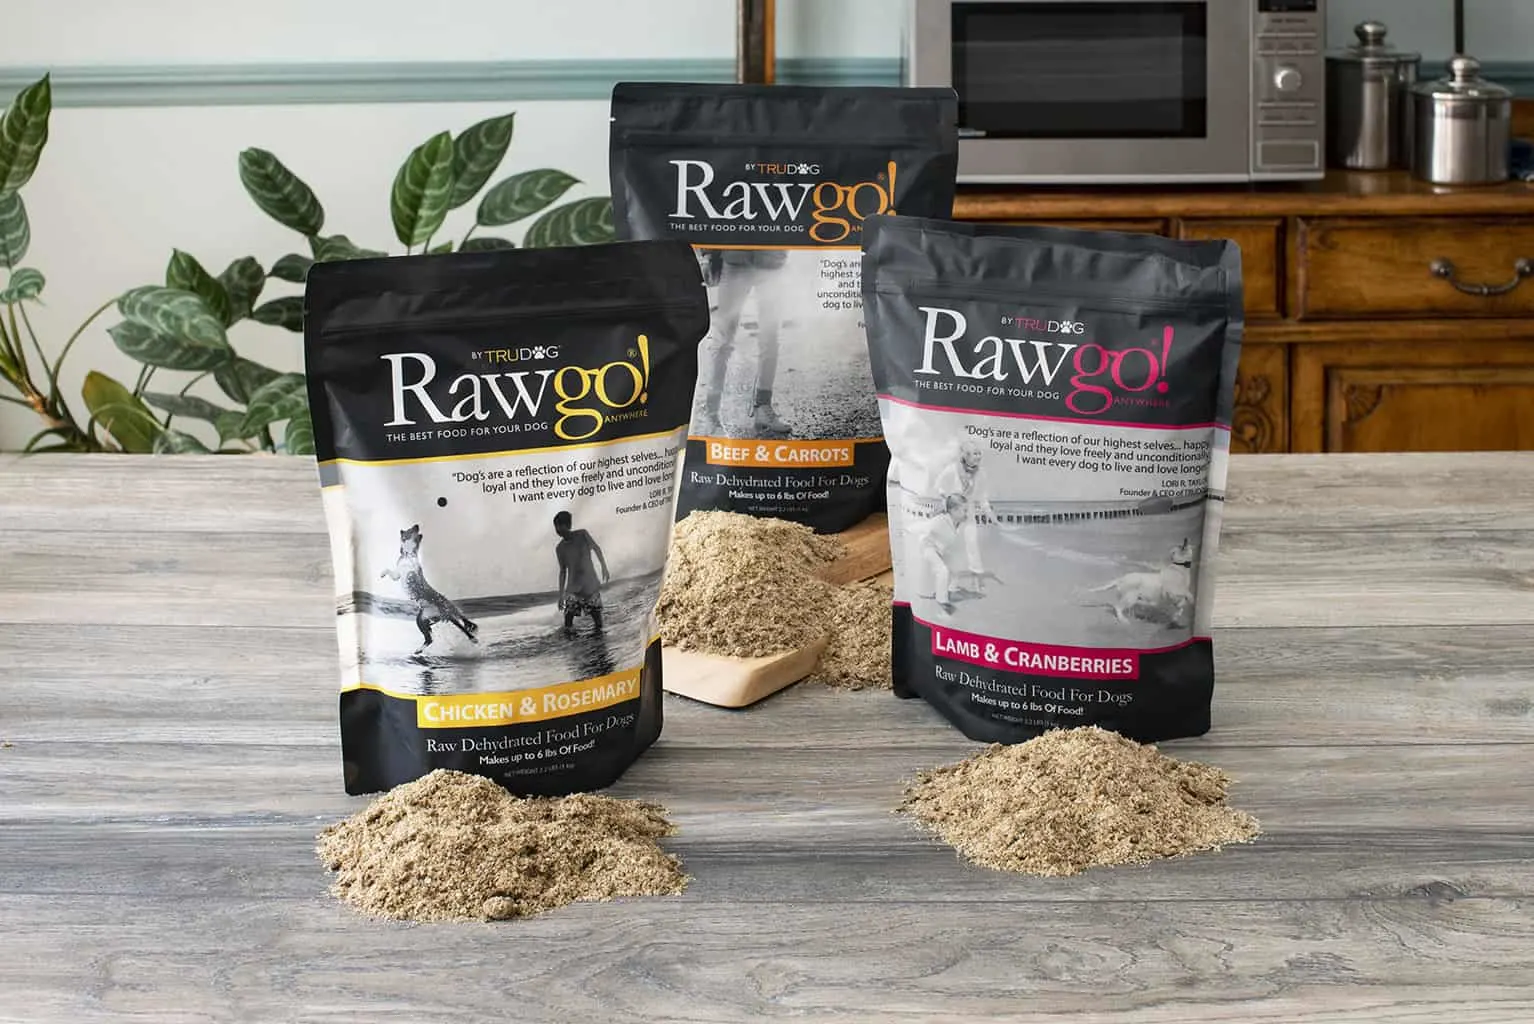 The flavors of Rawgo are beef & carrots, lamb & cranberries, and chicken and rosemary. These 2.2 lb bags make 6 pounds of food, each.